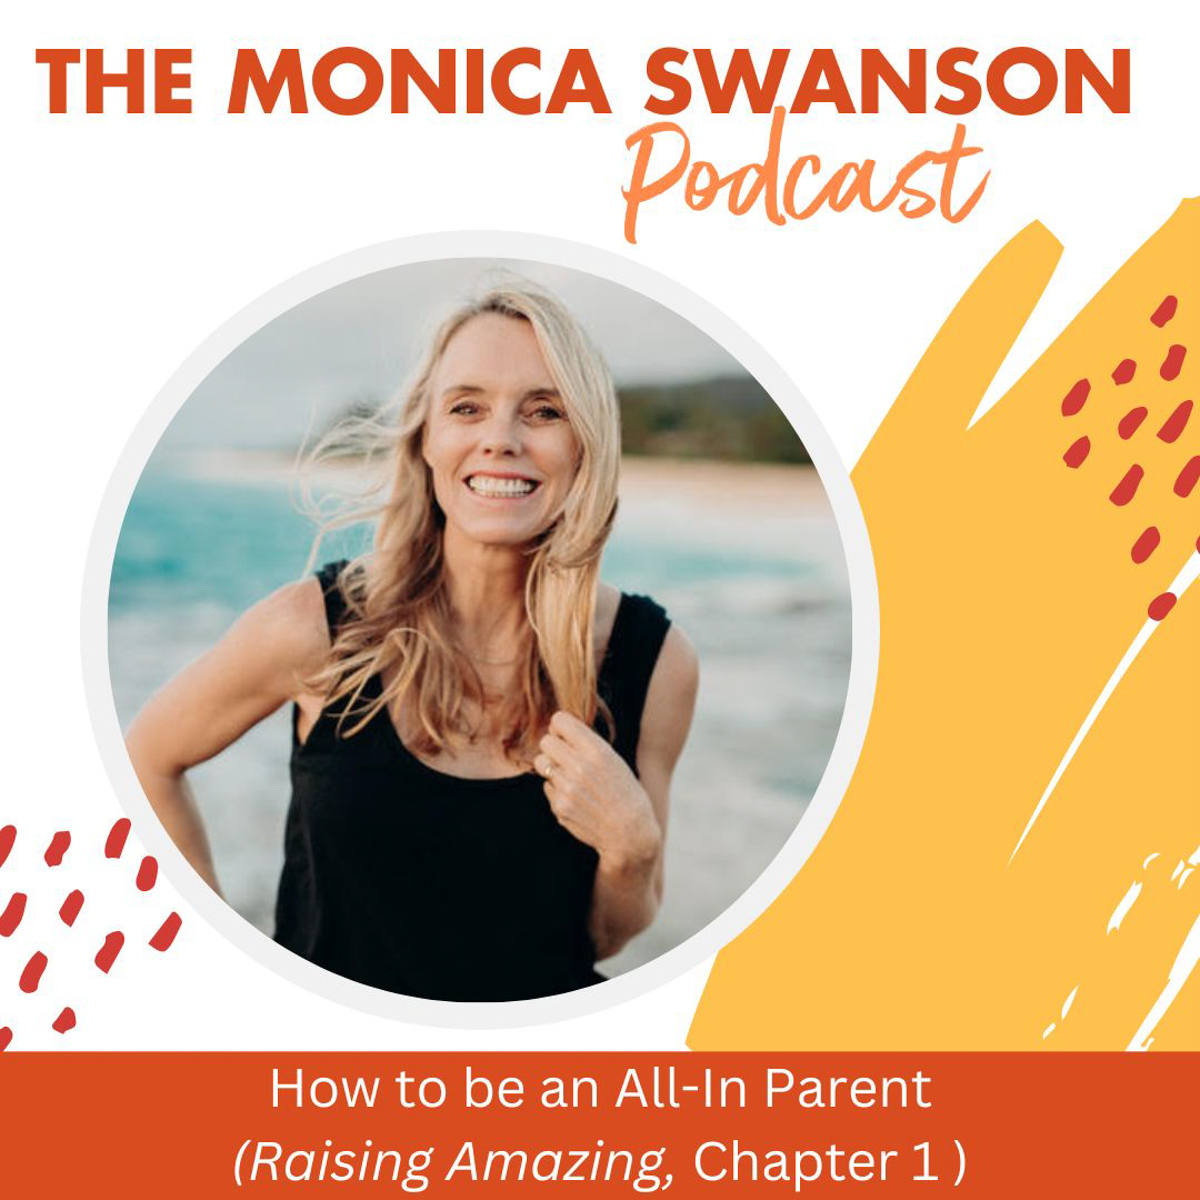 How to Be an All-In Parent (Raising Amazing, Chapter One, with Monica)